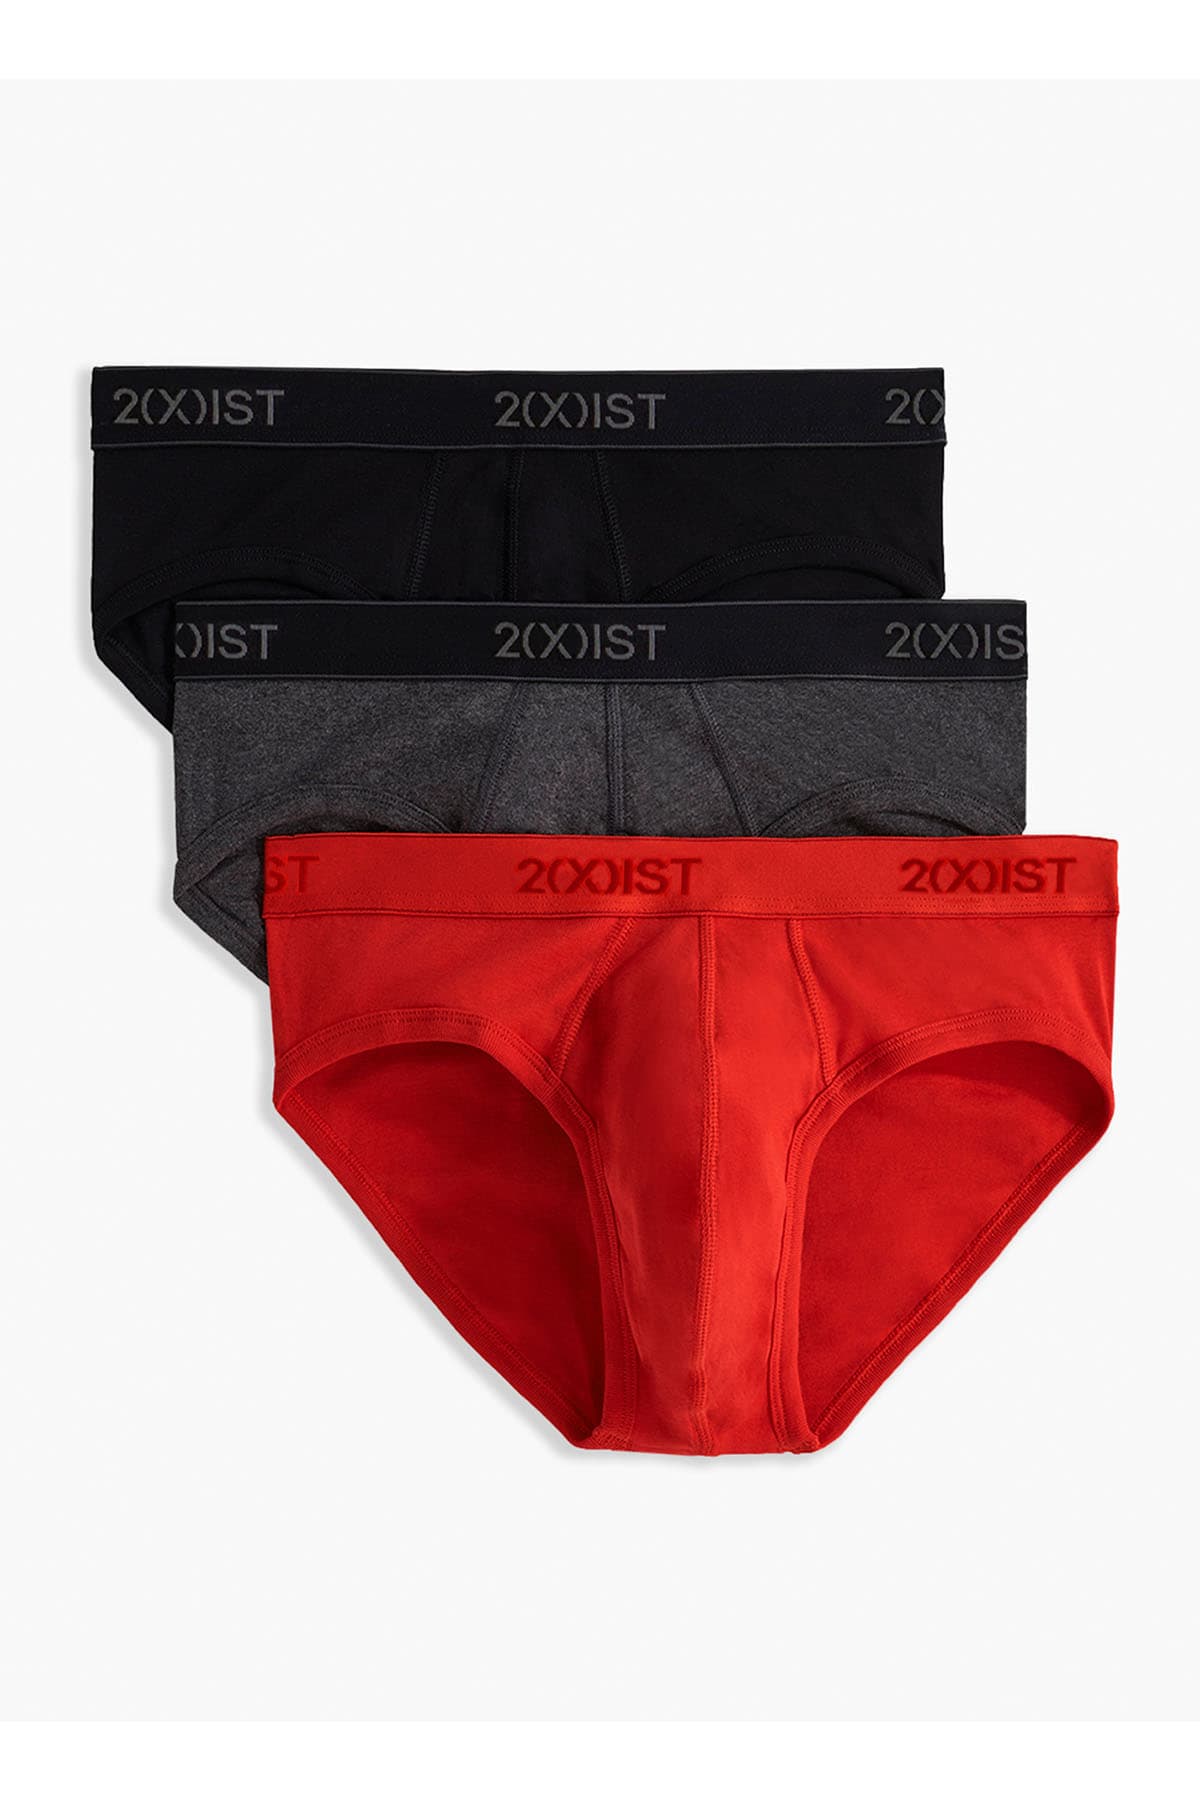 2(X)IST Red/Black/Charcoal Essential No-Show Brief